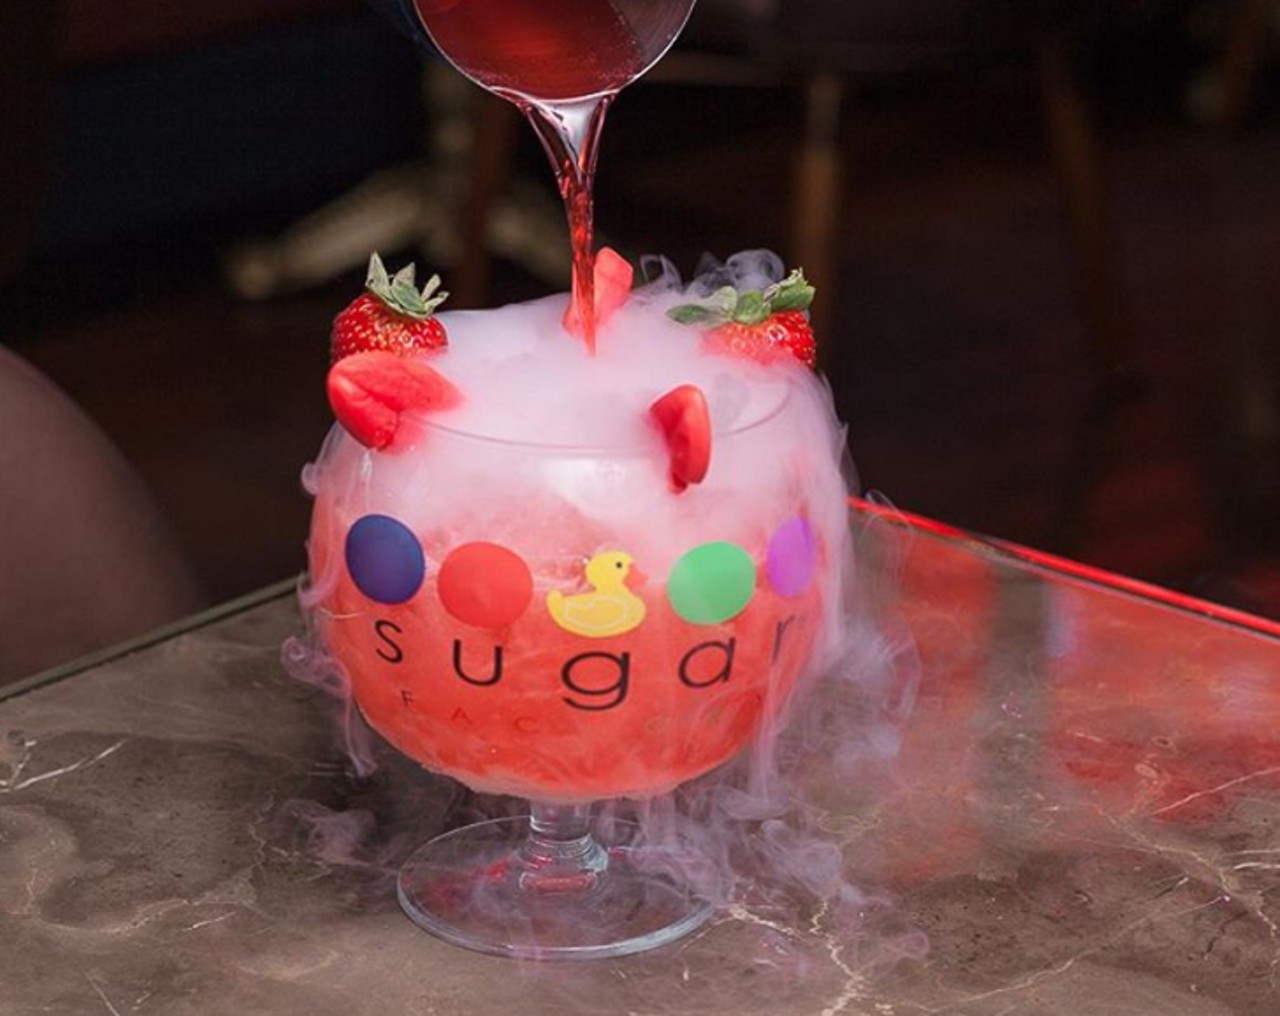 Sugar Factory  
5223 Orient Rd, Tampa
The Sugar Factory opened a new location in the Seminole Hard Rock Casino in December. The restaurant features a 4,000-square-foot, floor-to-ceiling candy wall with over 500 types of candy 64-ounce alcohol-infused smoking candy goblets. 
Photo via The Sugar Factory/Instagram